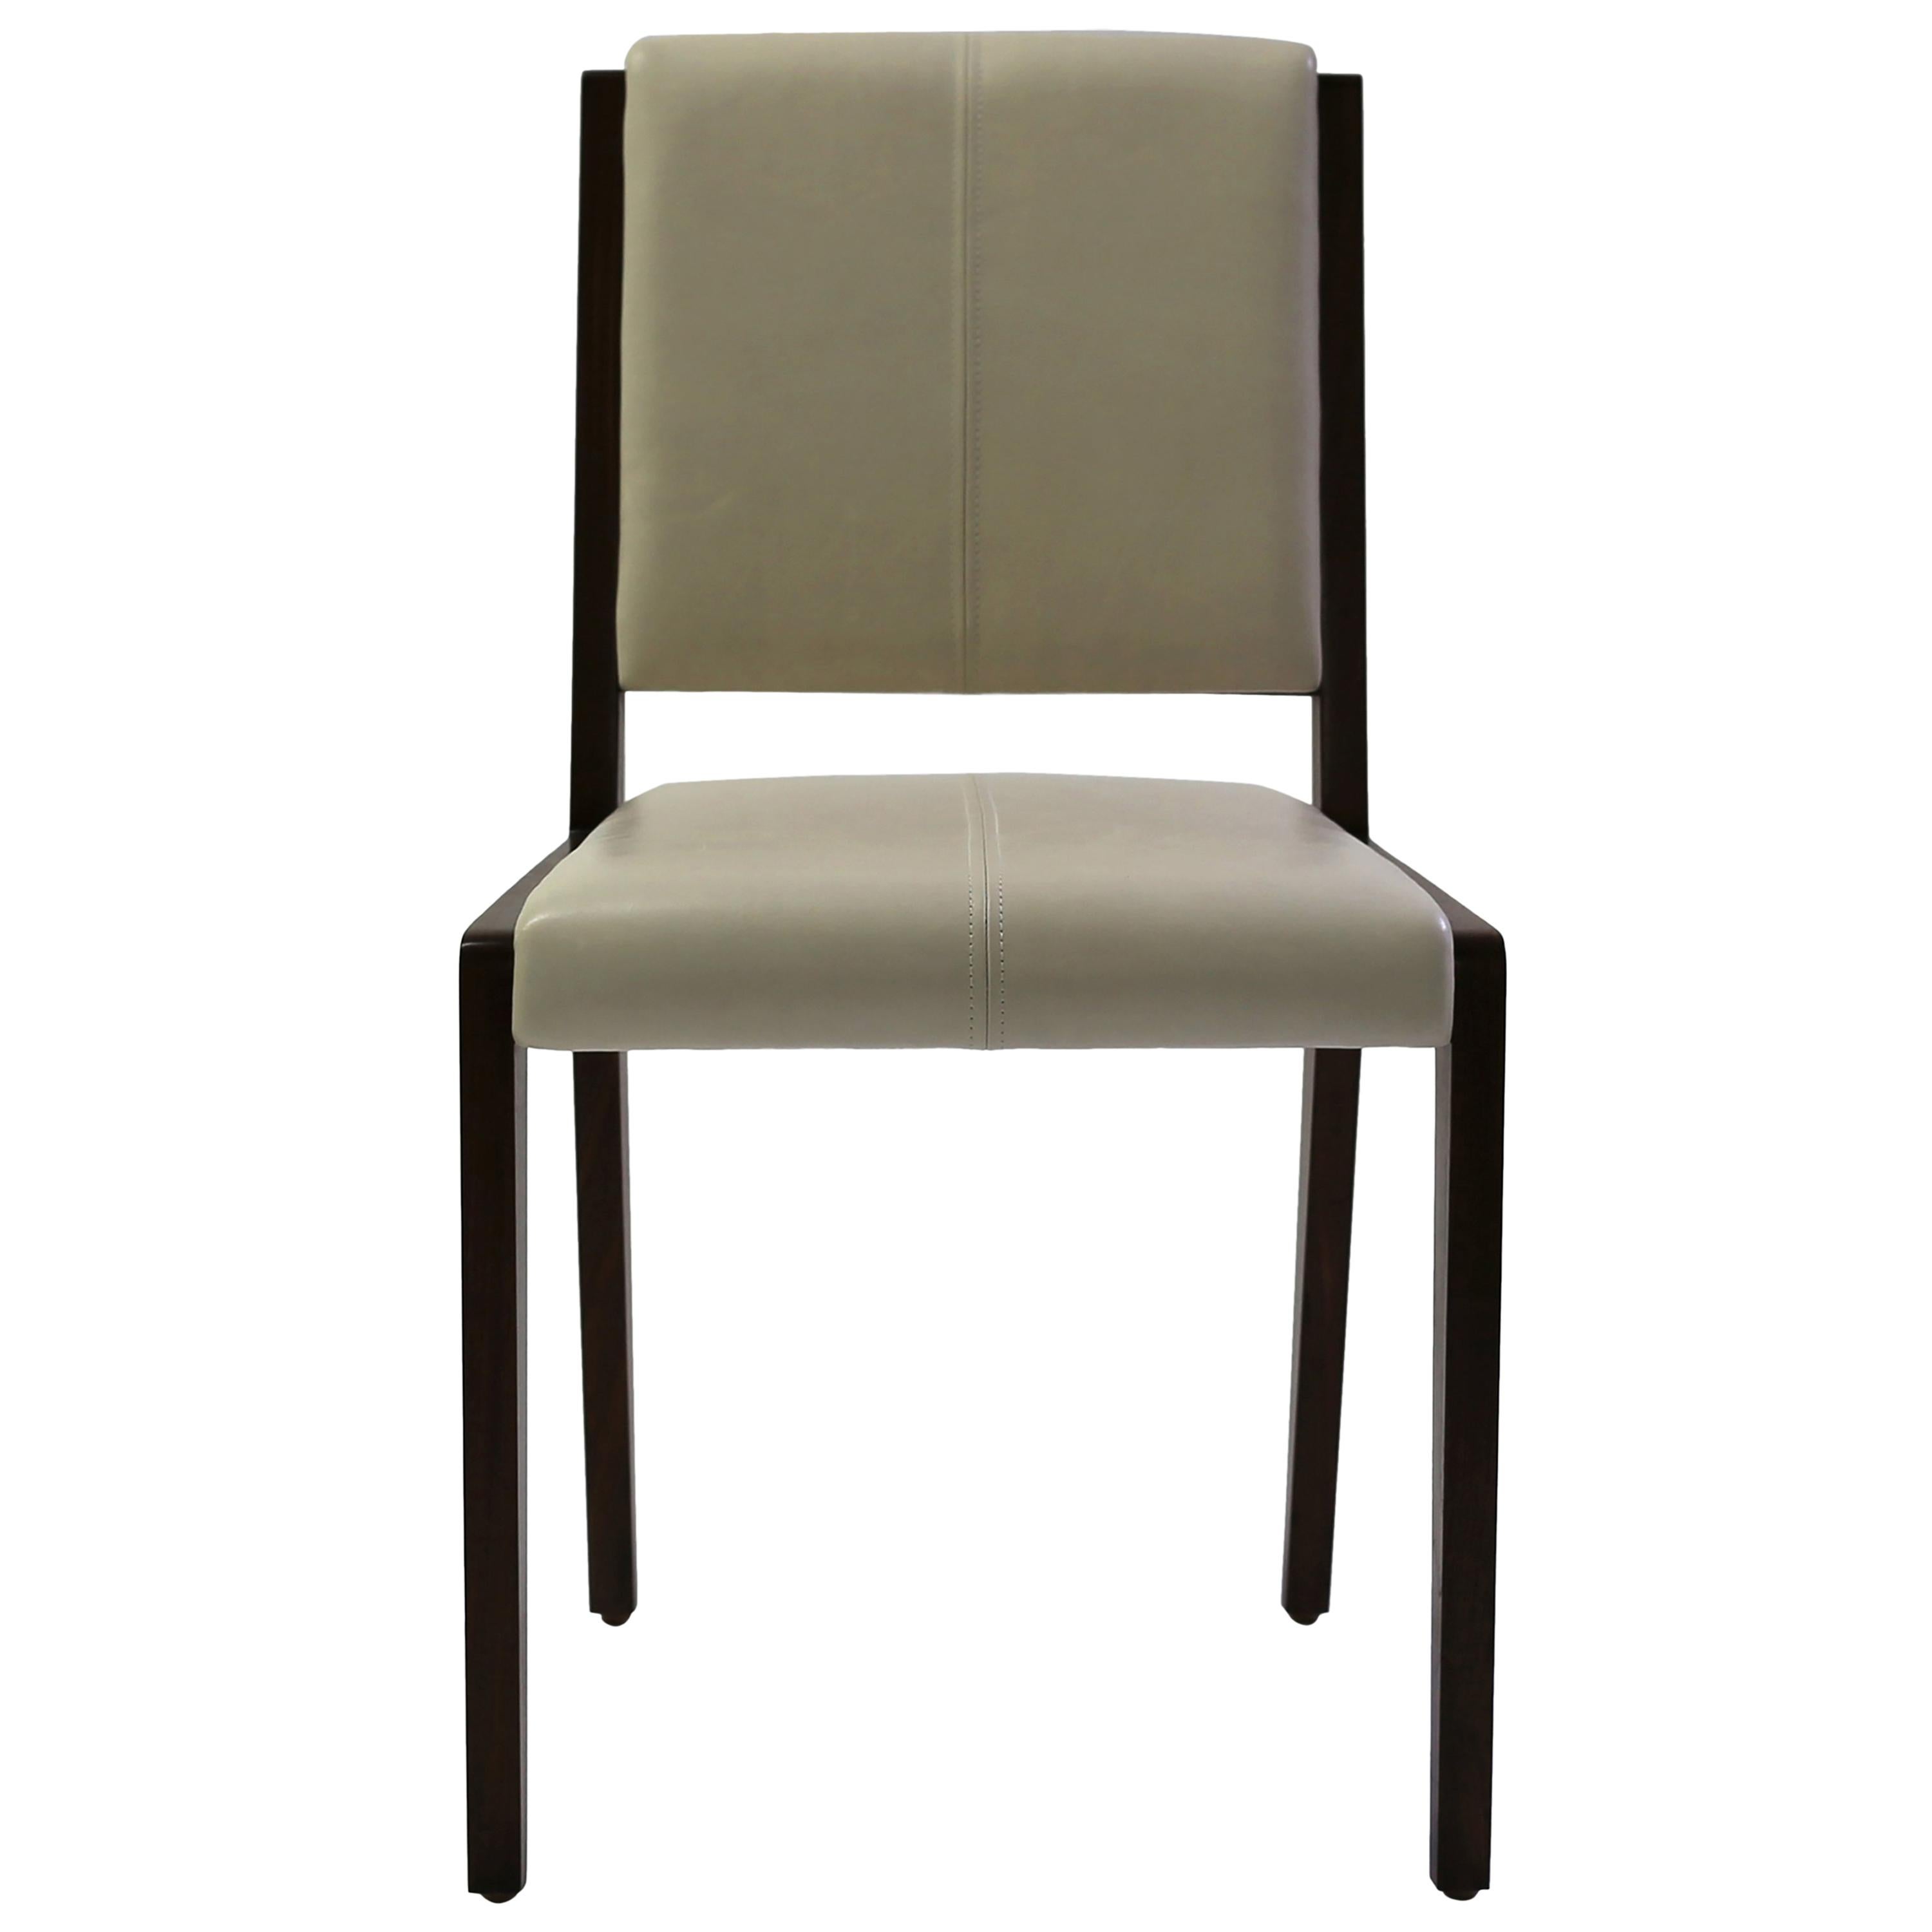 Tan Leather Upholstered Side Chair with Saddle Stitch Detail and Wood Frame